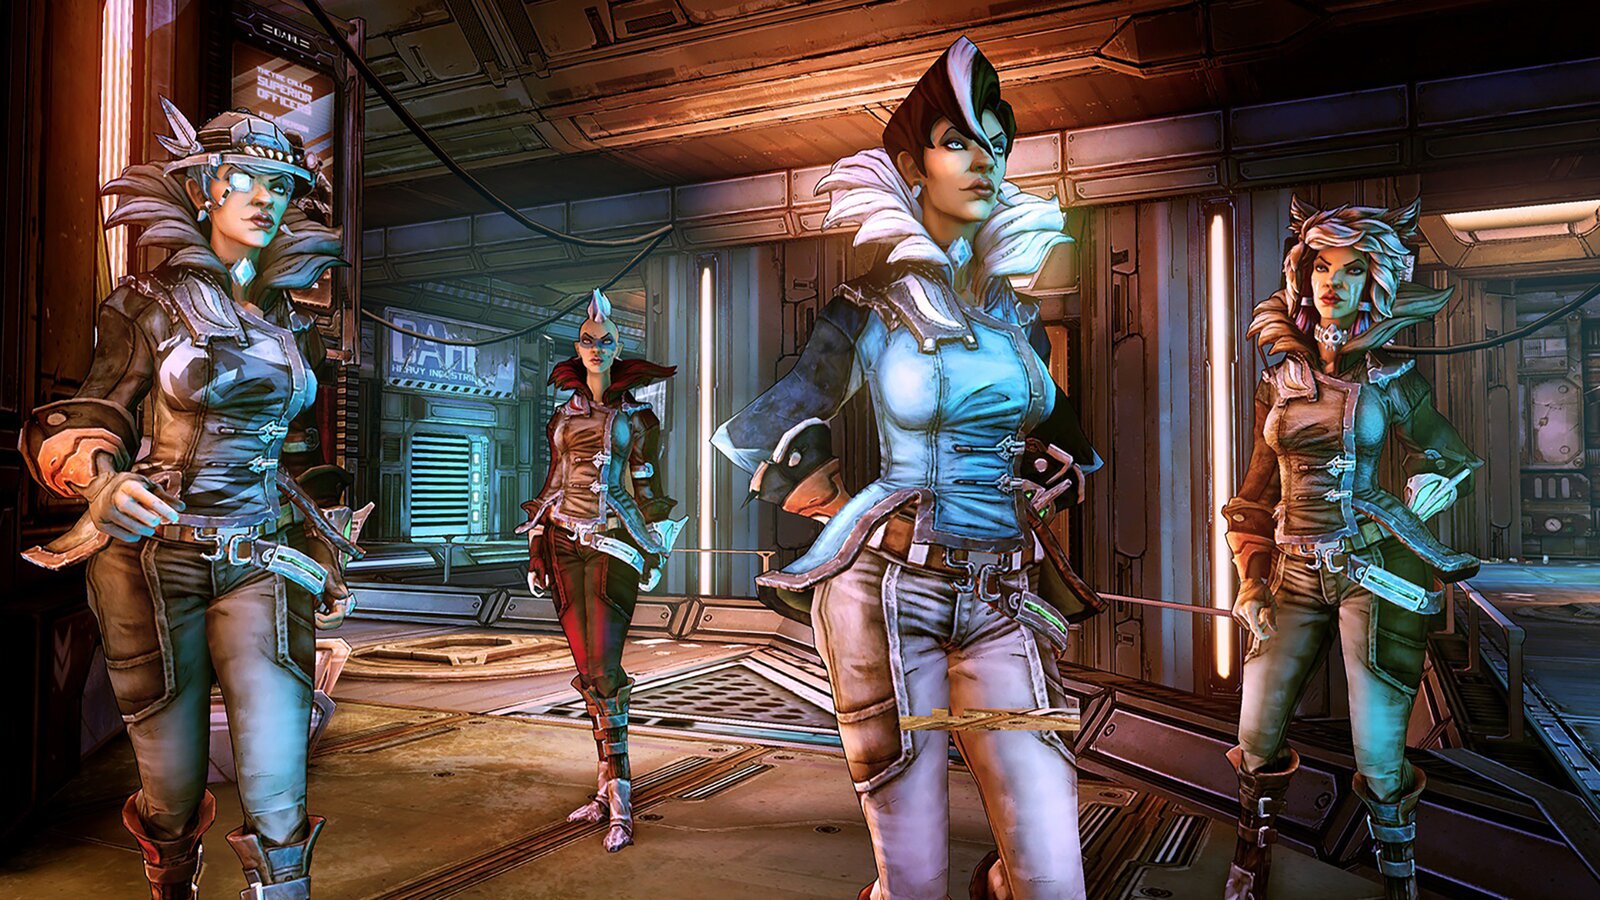 Borderlands: The Pre-Sequel - Lady Hammerlock the Baroness Pack